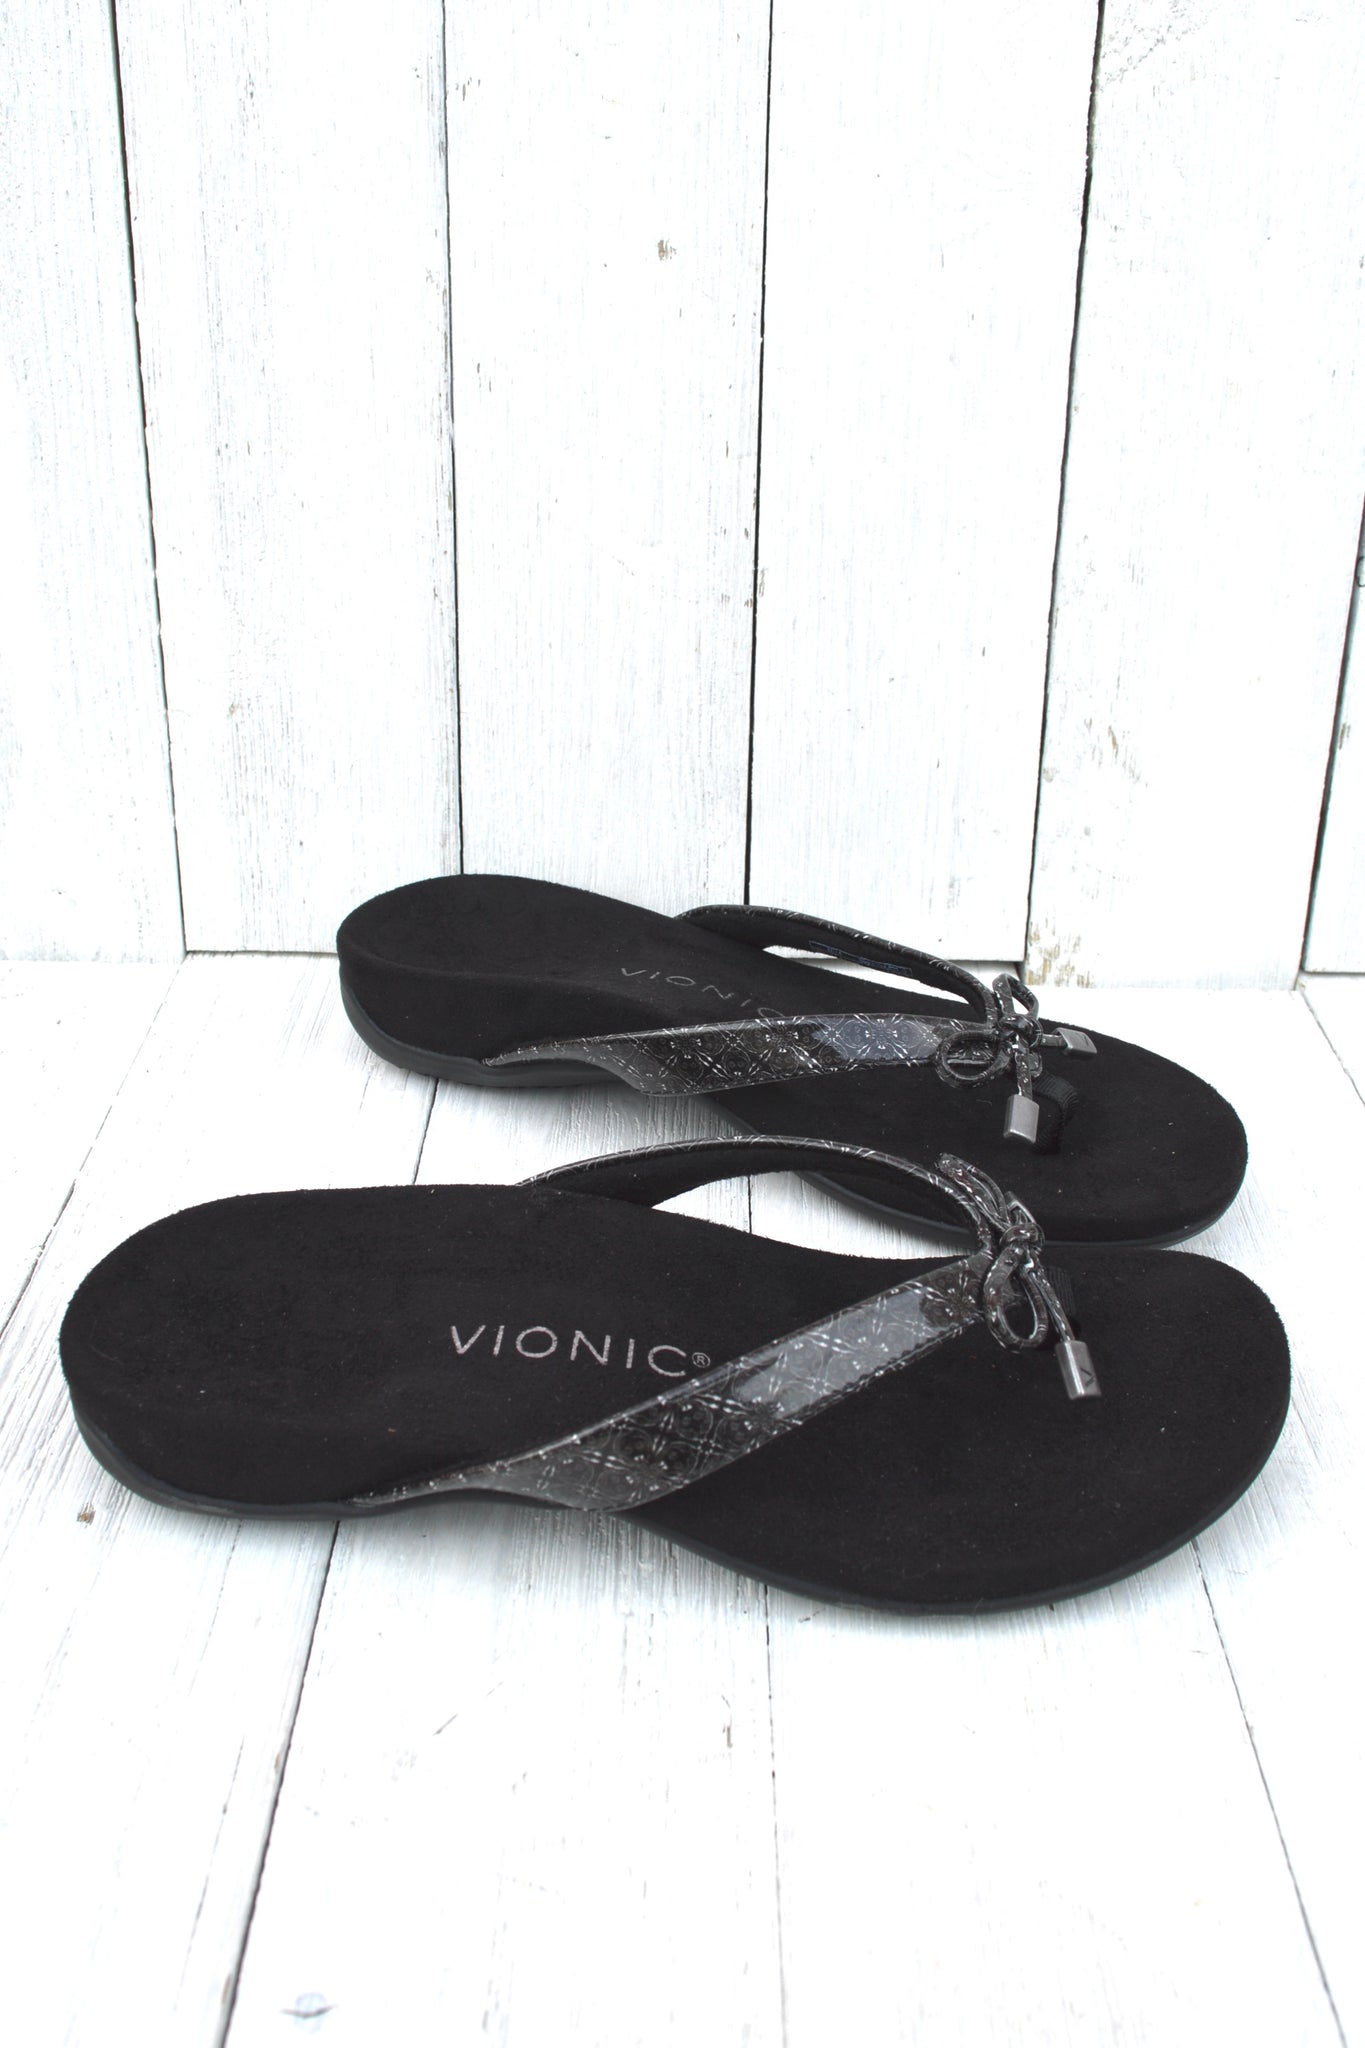 Vionic Rest Bella Size 7.5 only